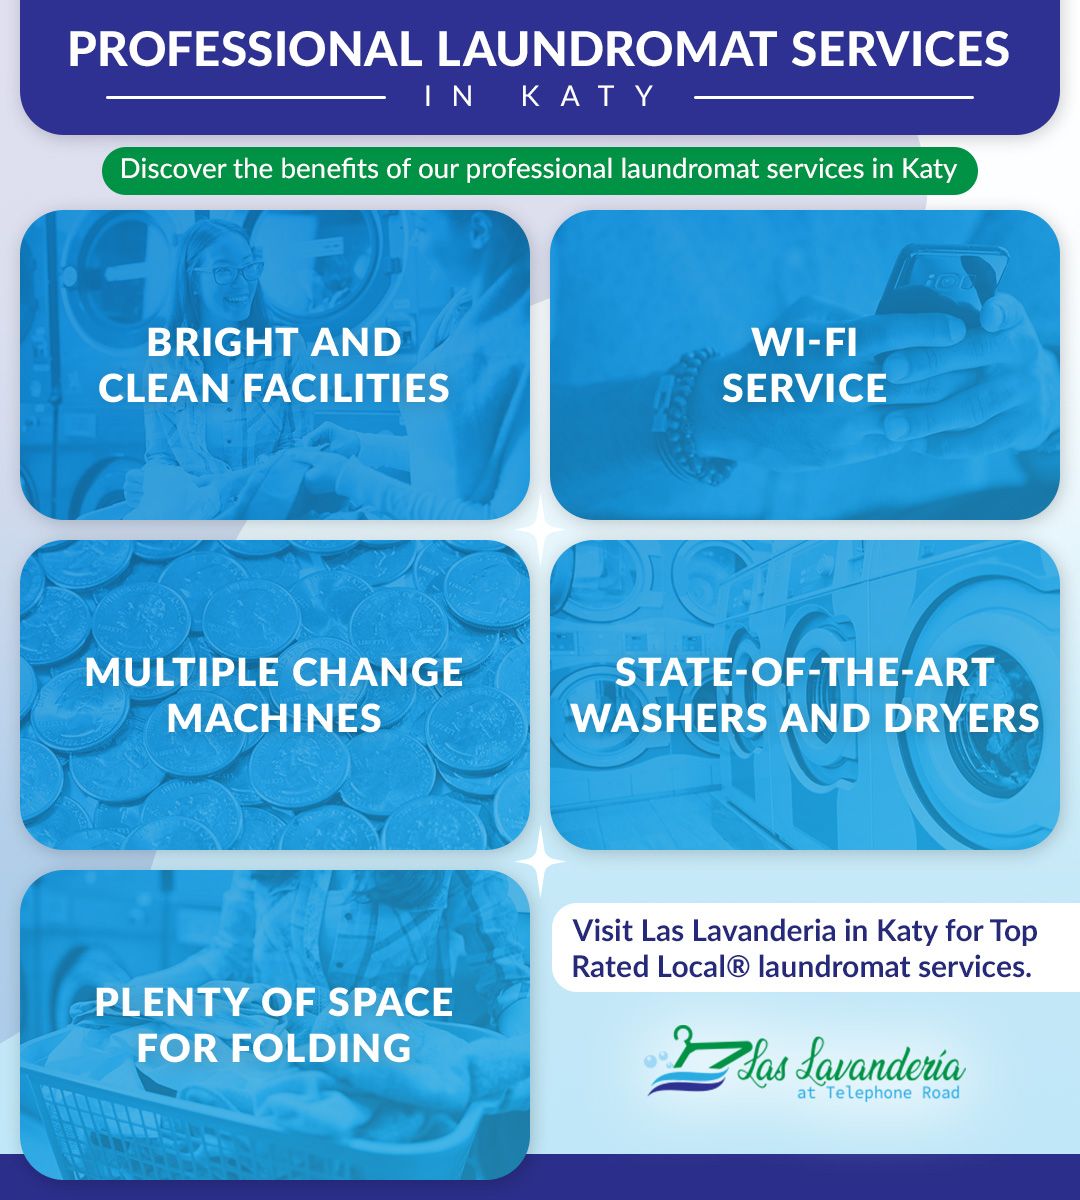 Professional-Laundromat-Services-in-Katy-60a6bac21363b.jpg